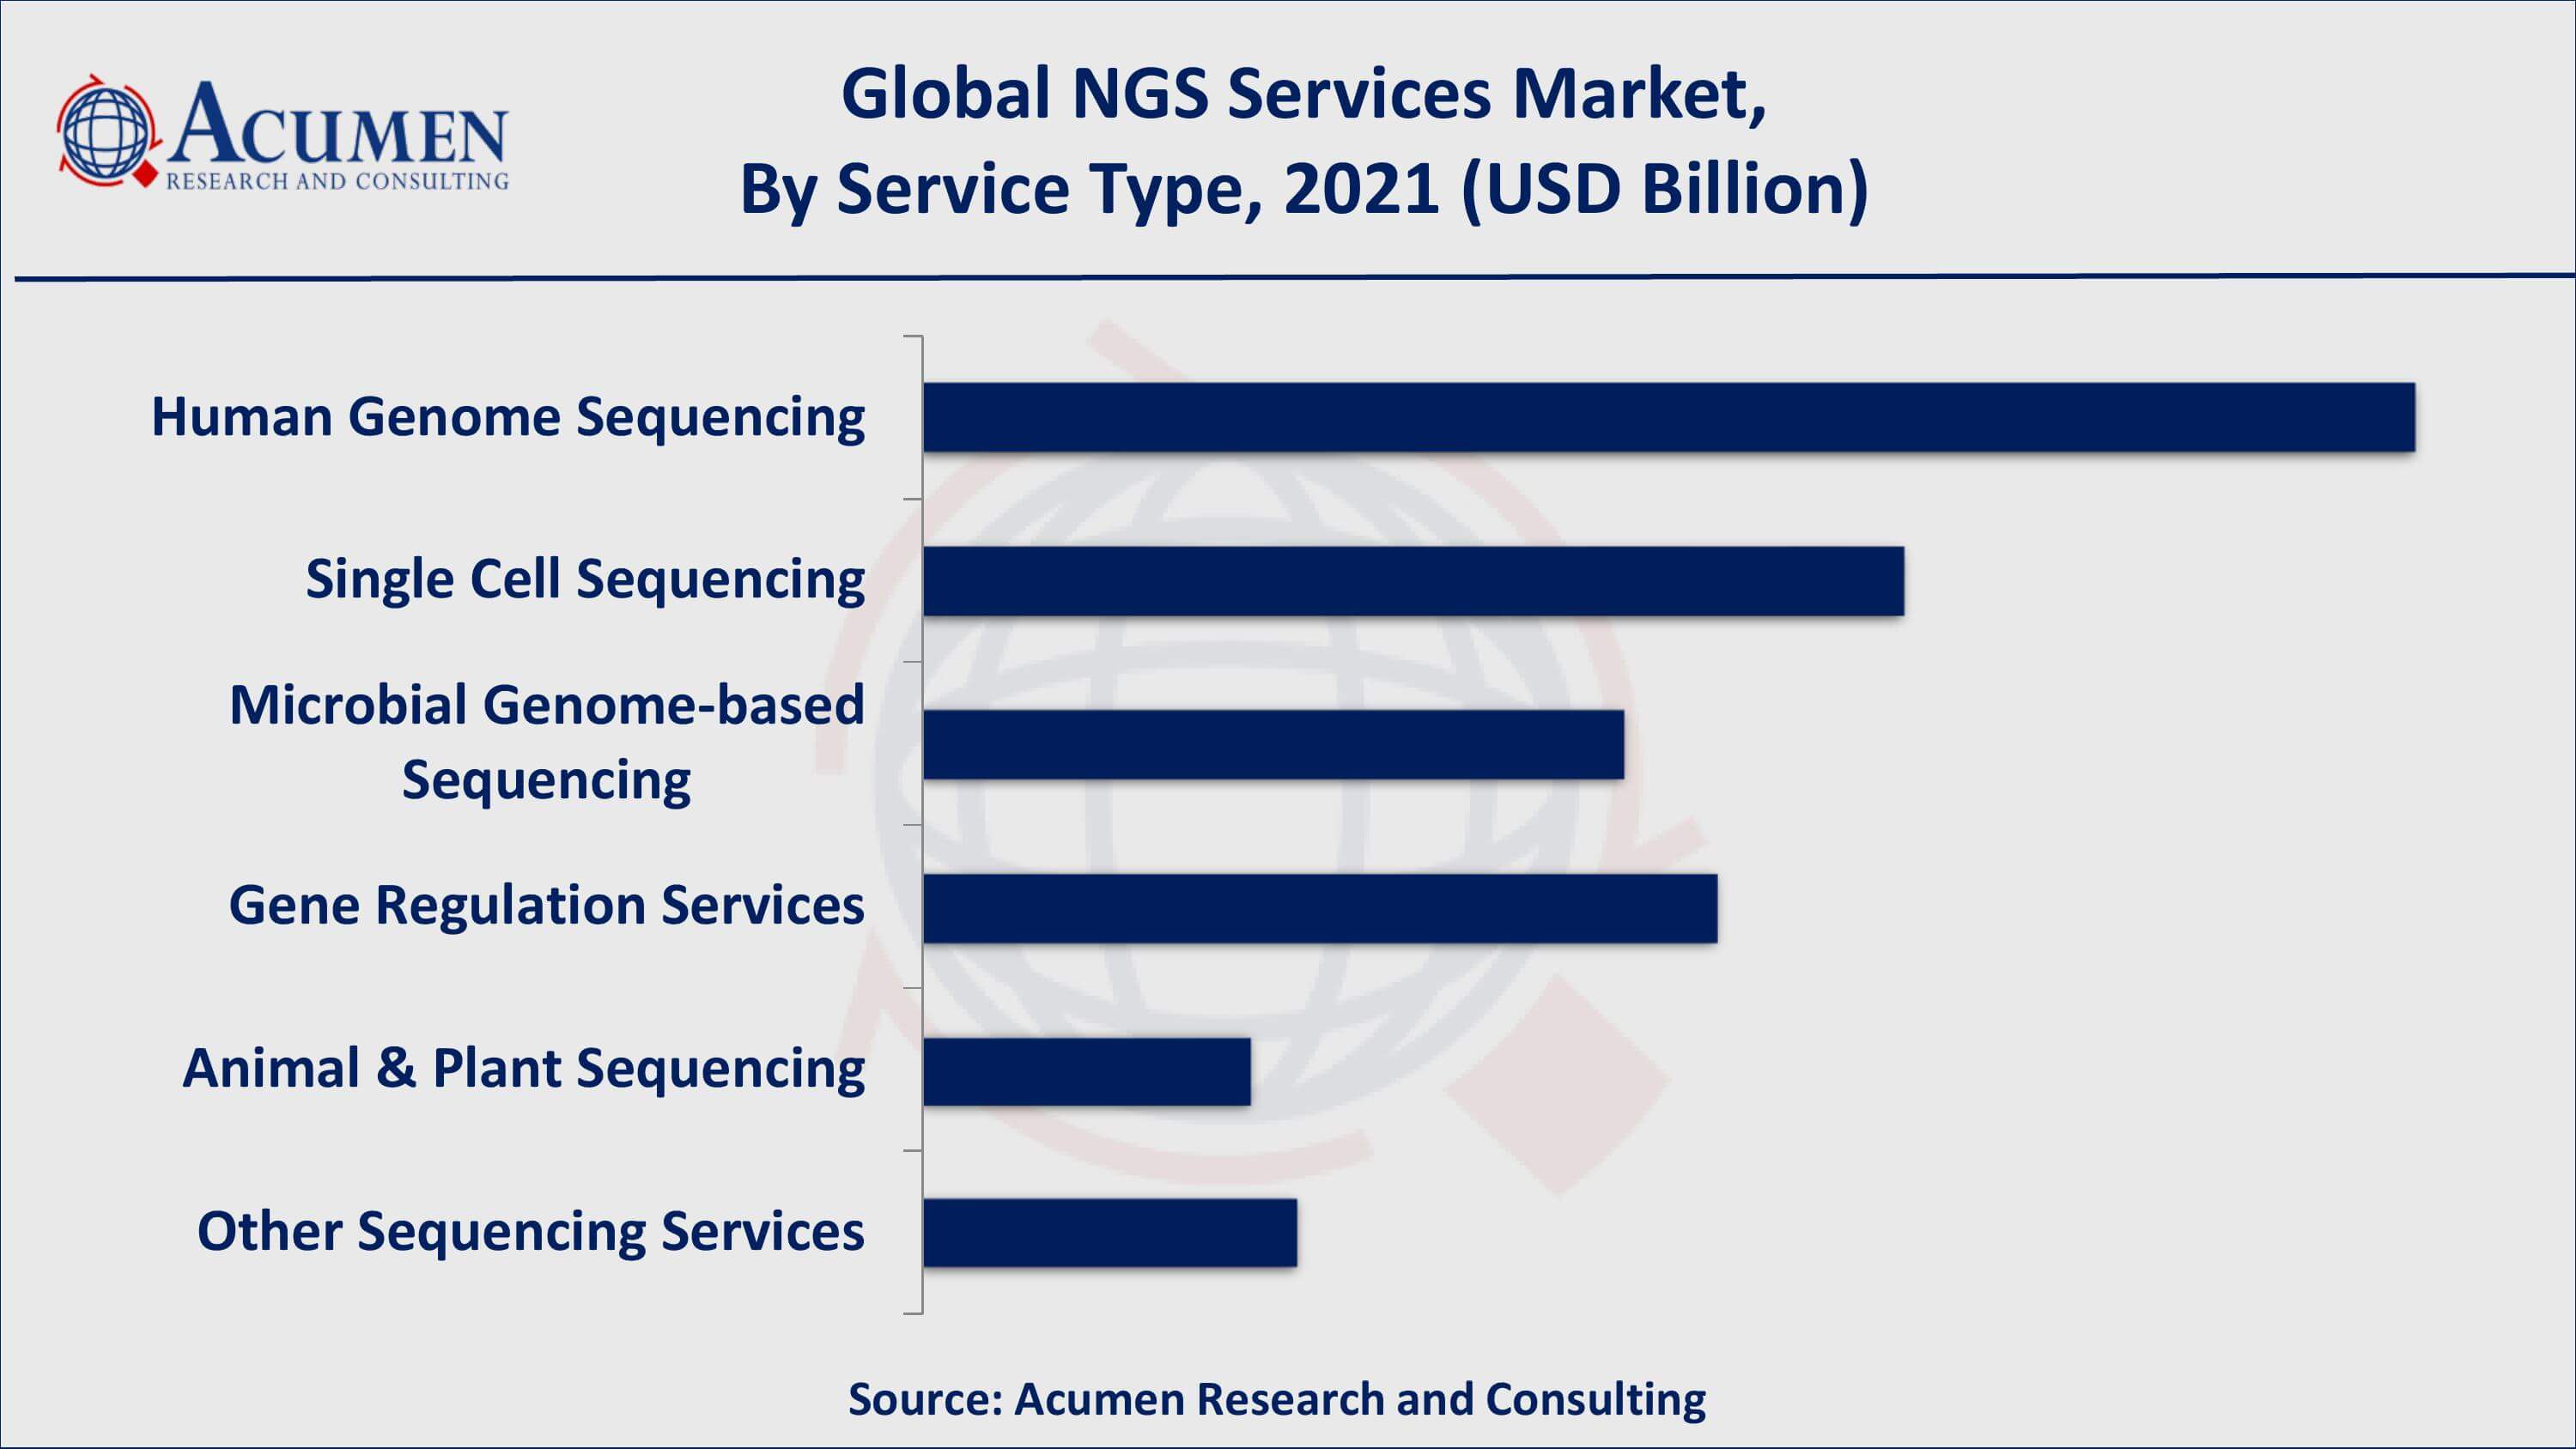 Based on service type, human genome sequencing captured over 30% of the overall market share in 2021